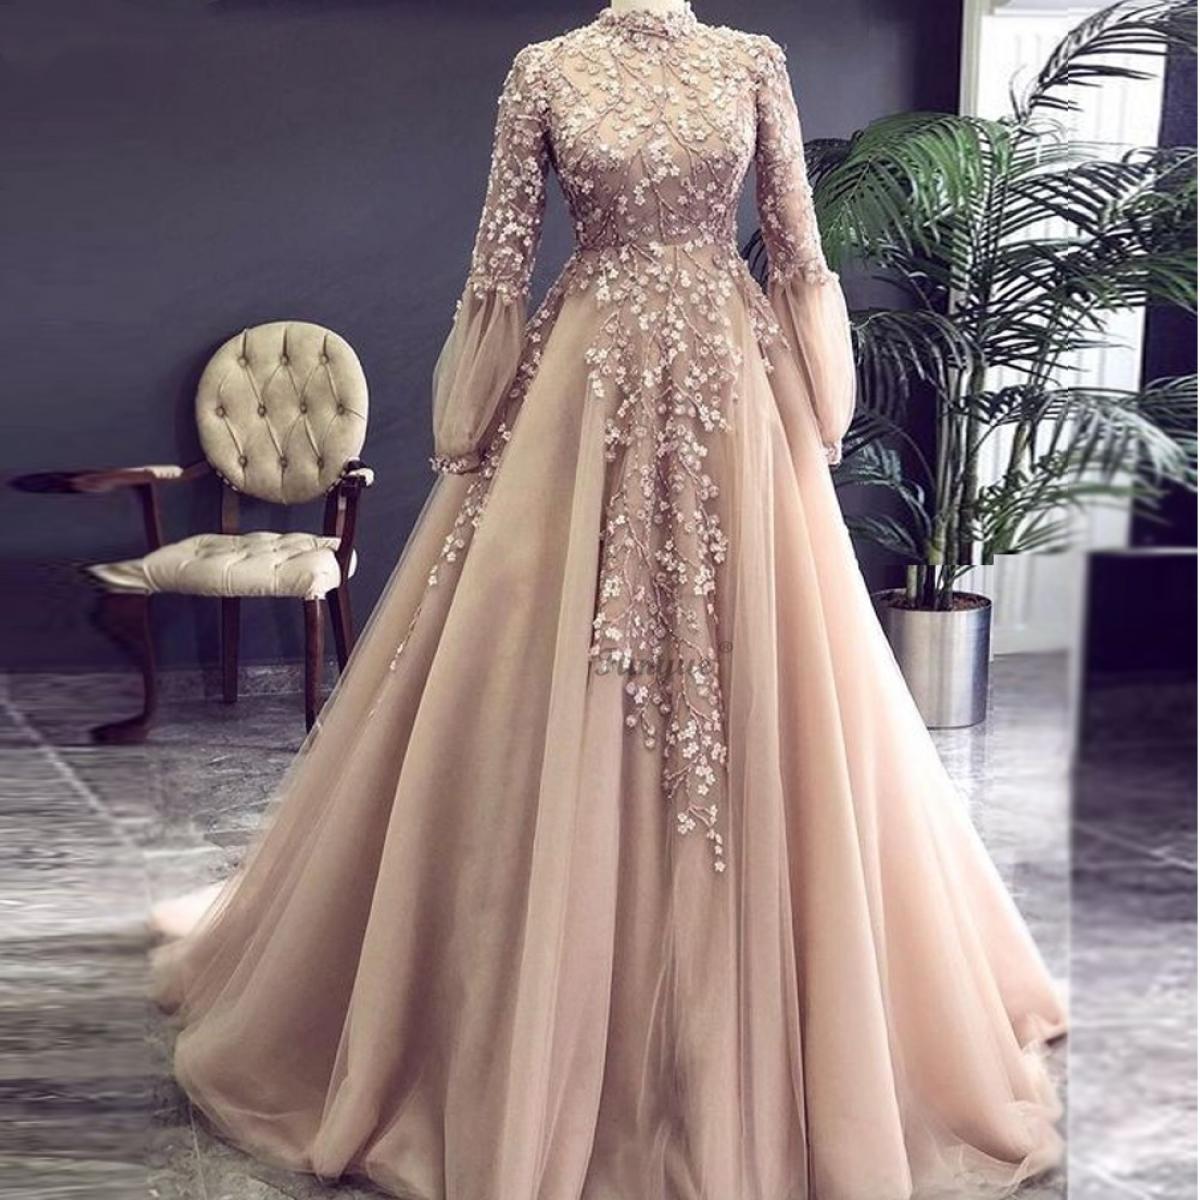 Champagne Arabic Muslim Evening Dresses Long Sleeves Appliques Flowers Beading Party Gowns A Line Tulle Formal Prom Dres